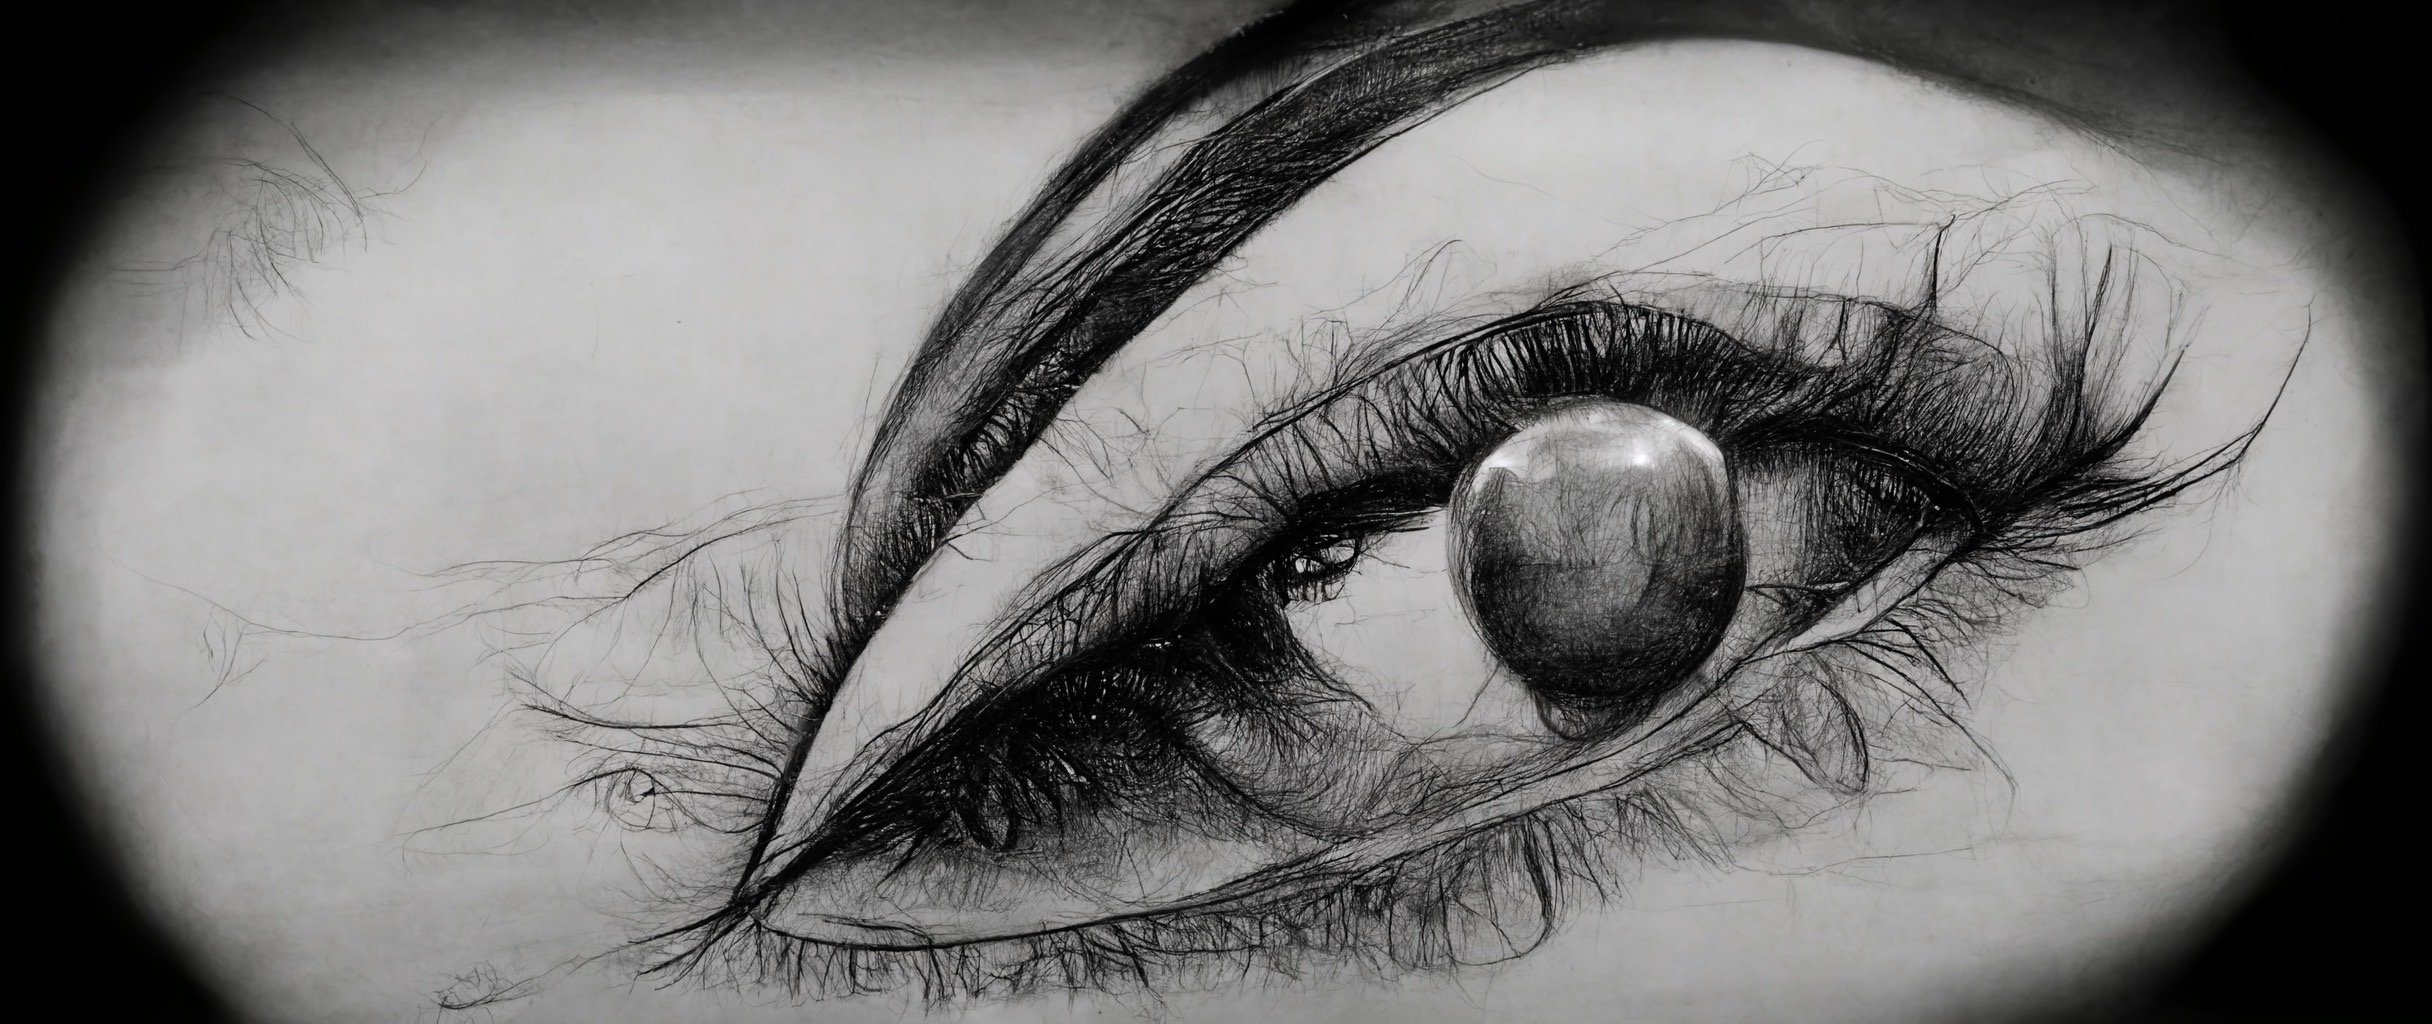 b879a6a7-a40f-46d8-8e97-5b97bb8857c7_S3RAPH_httpss.mj.runR7JS4y__Pierre-Yves_Riveau_sketch_of_a_young_womans_eye._Graphite._Beautiful._cinematic.JPG